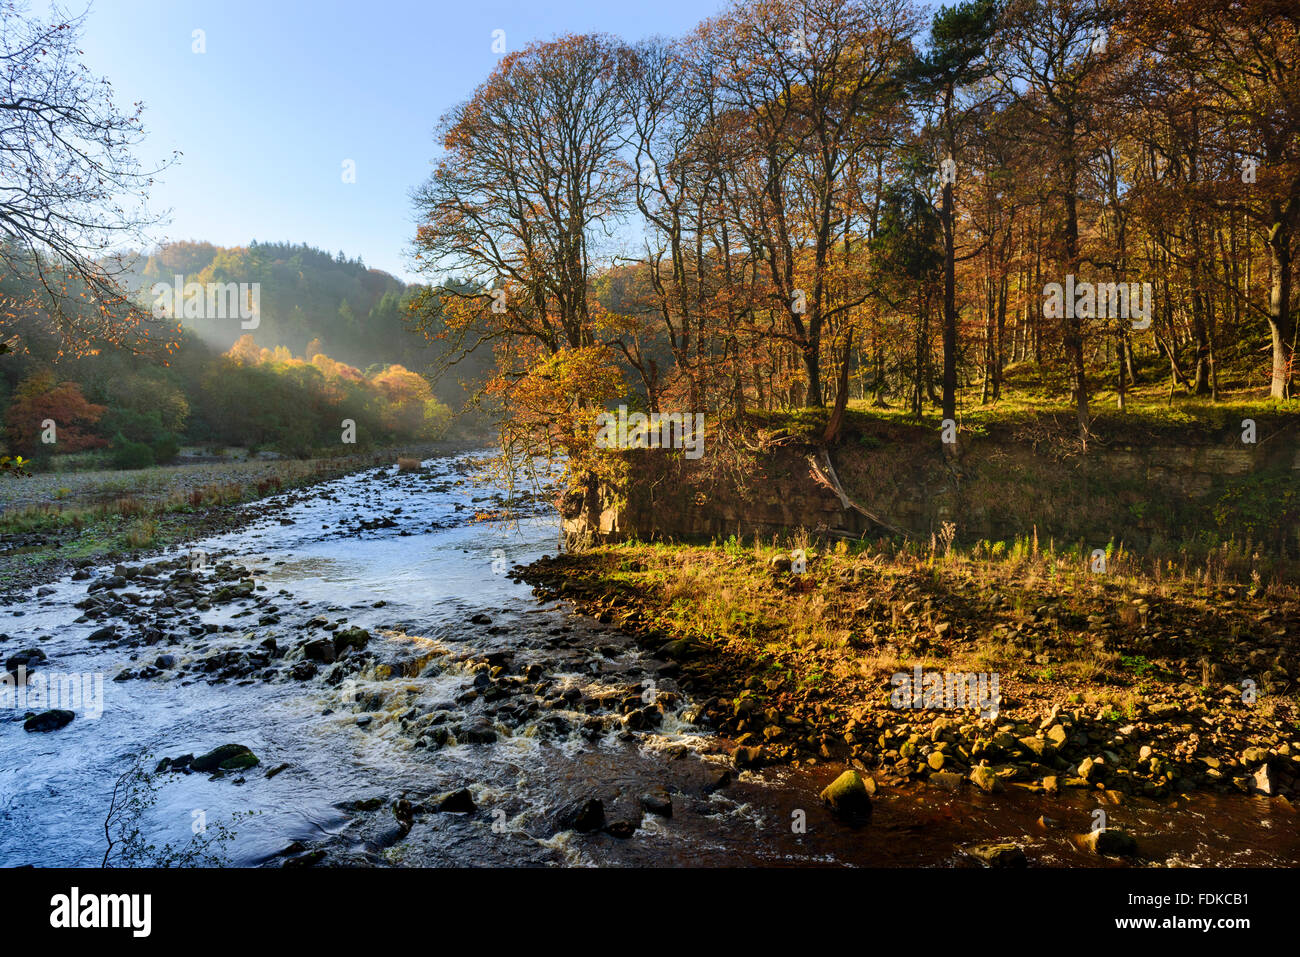 The river Allen at Staward Gorge Stock Photo